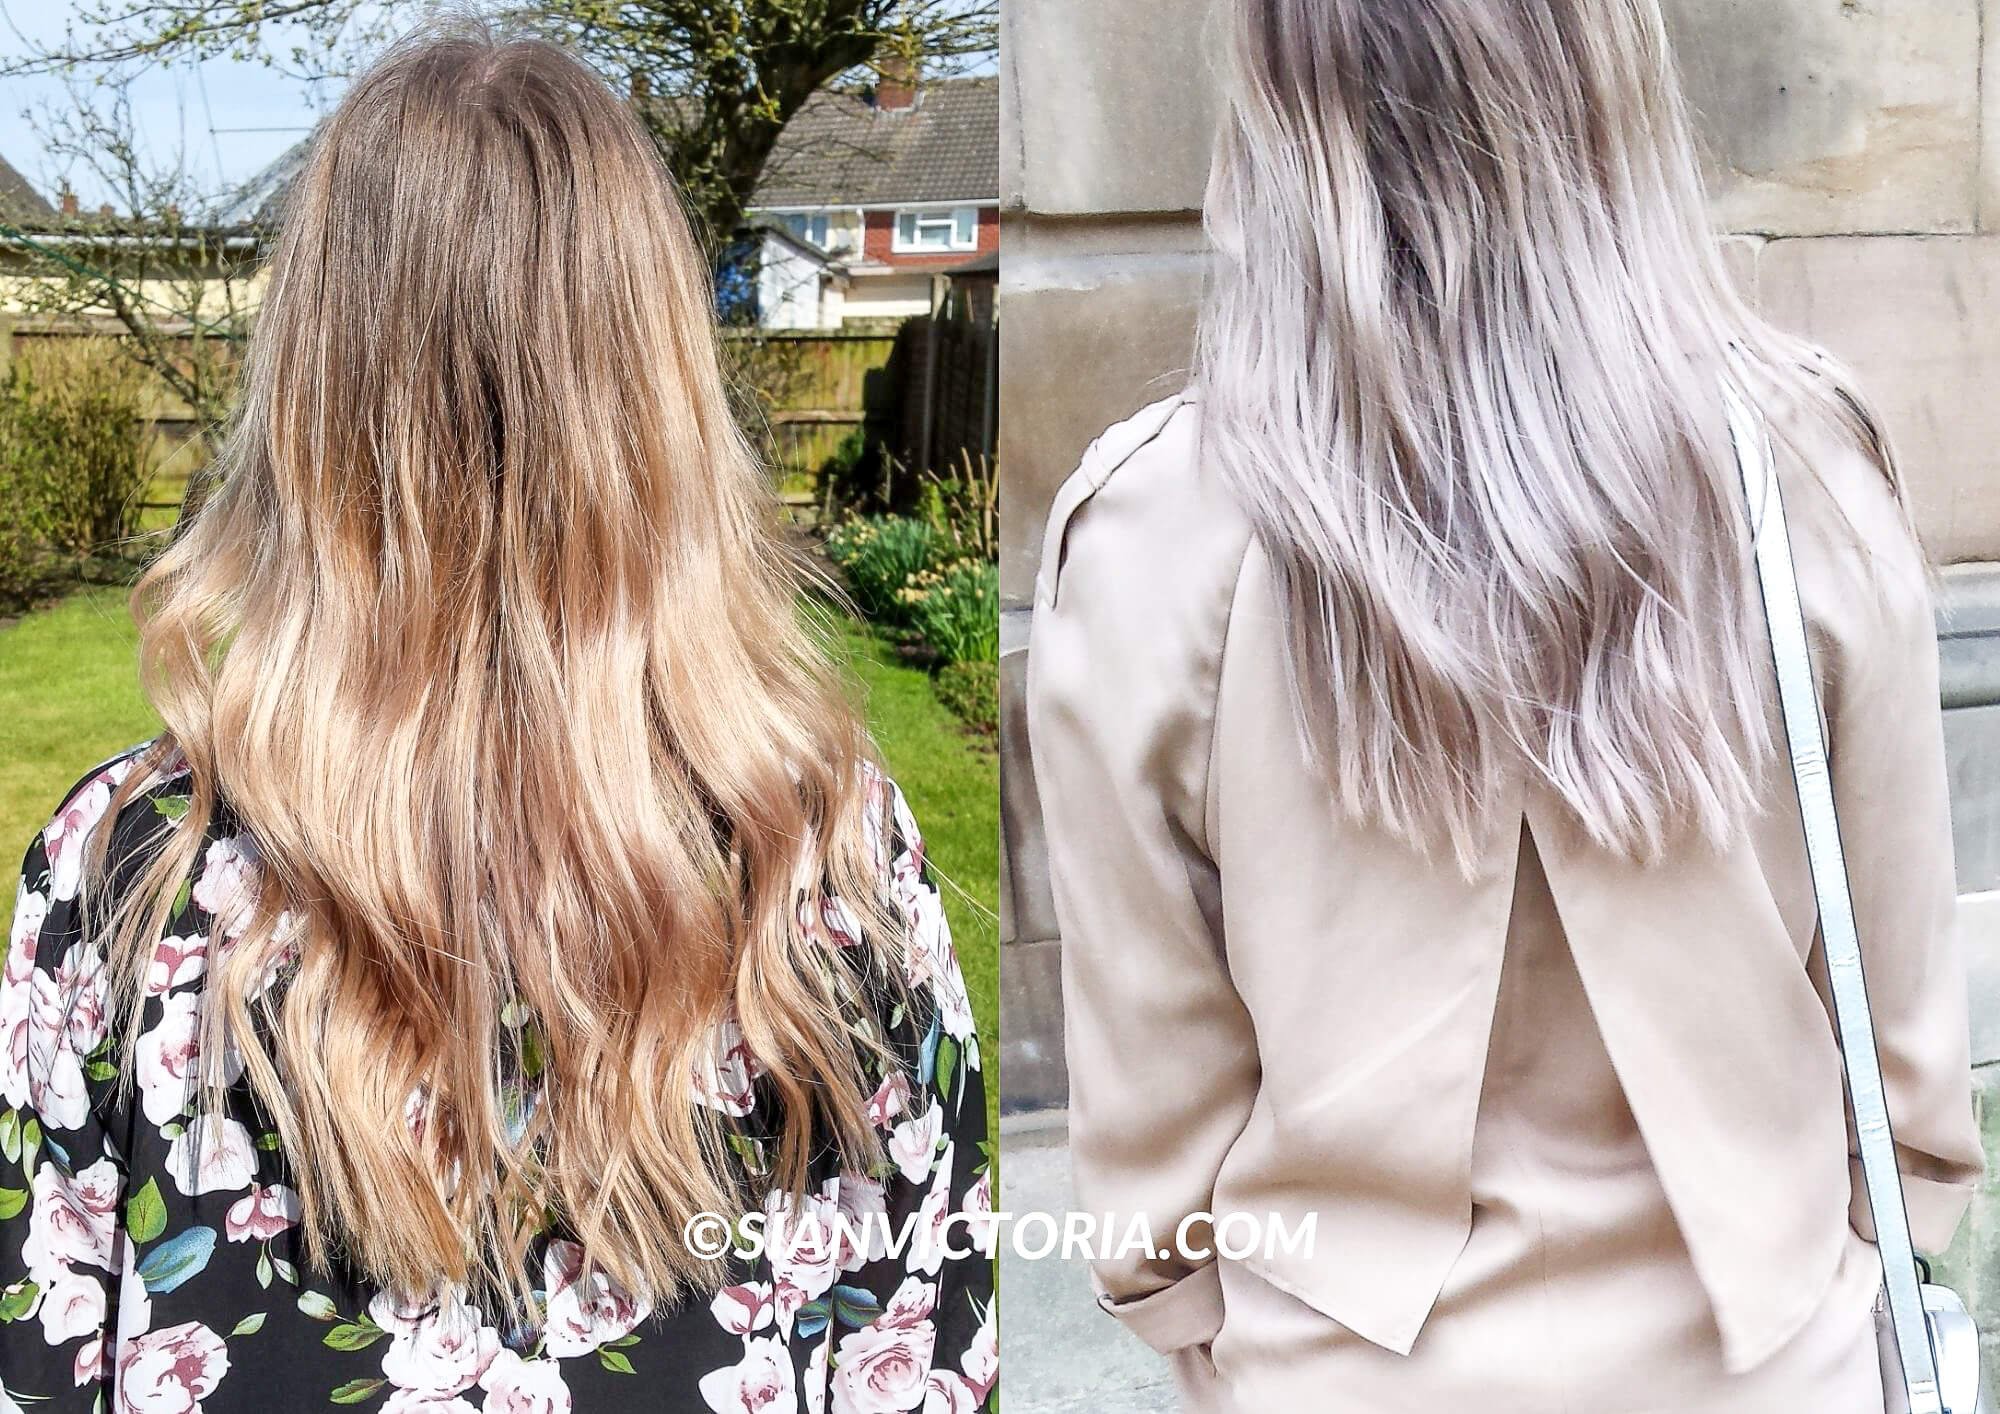 Before & After: Best Purple Ash Hair Shampoo — Sian Victoria.